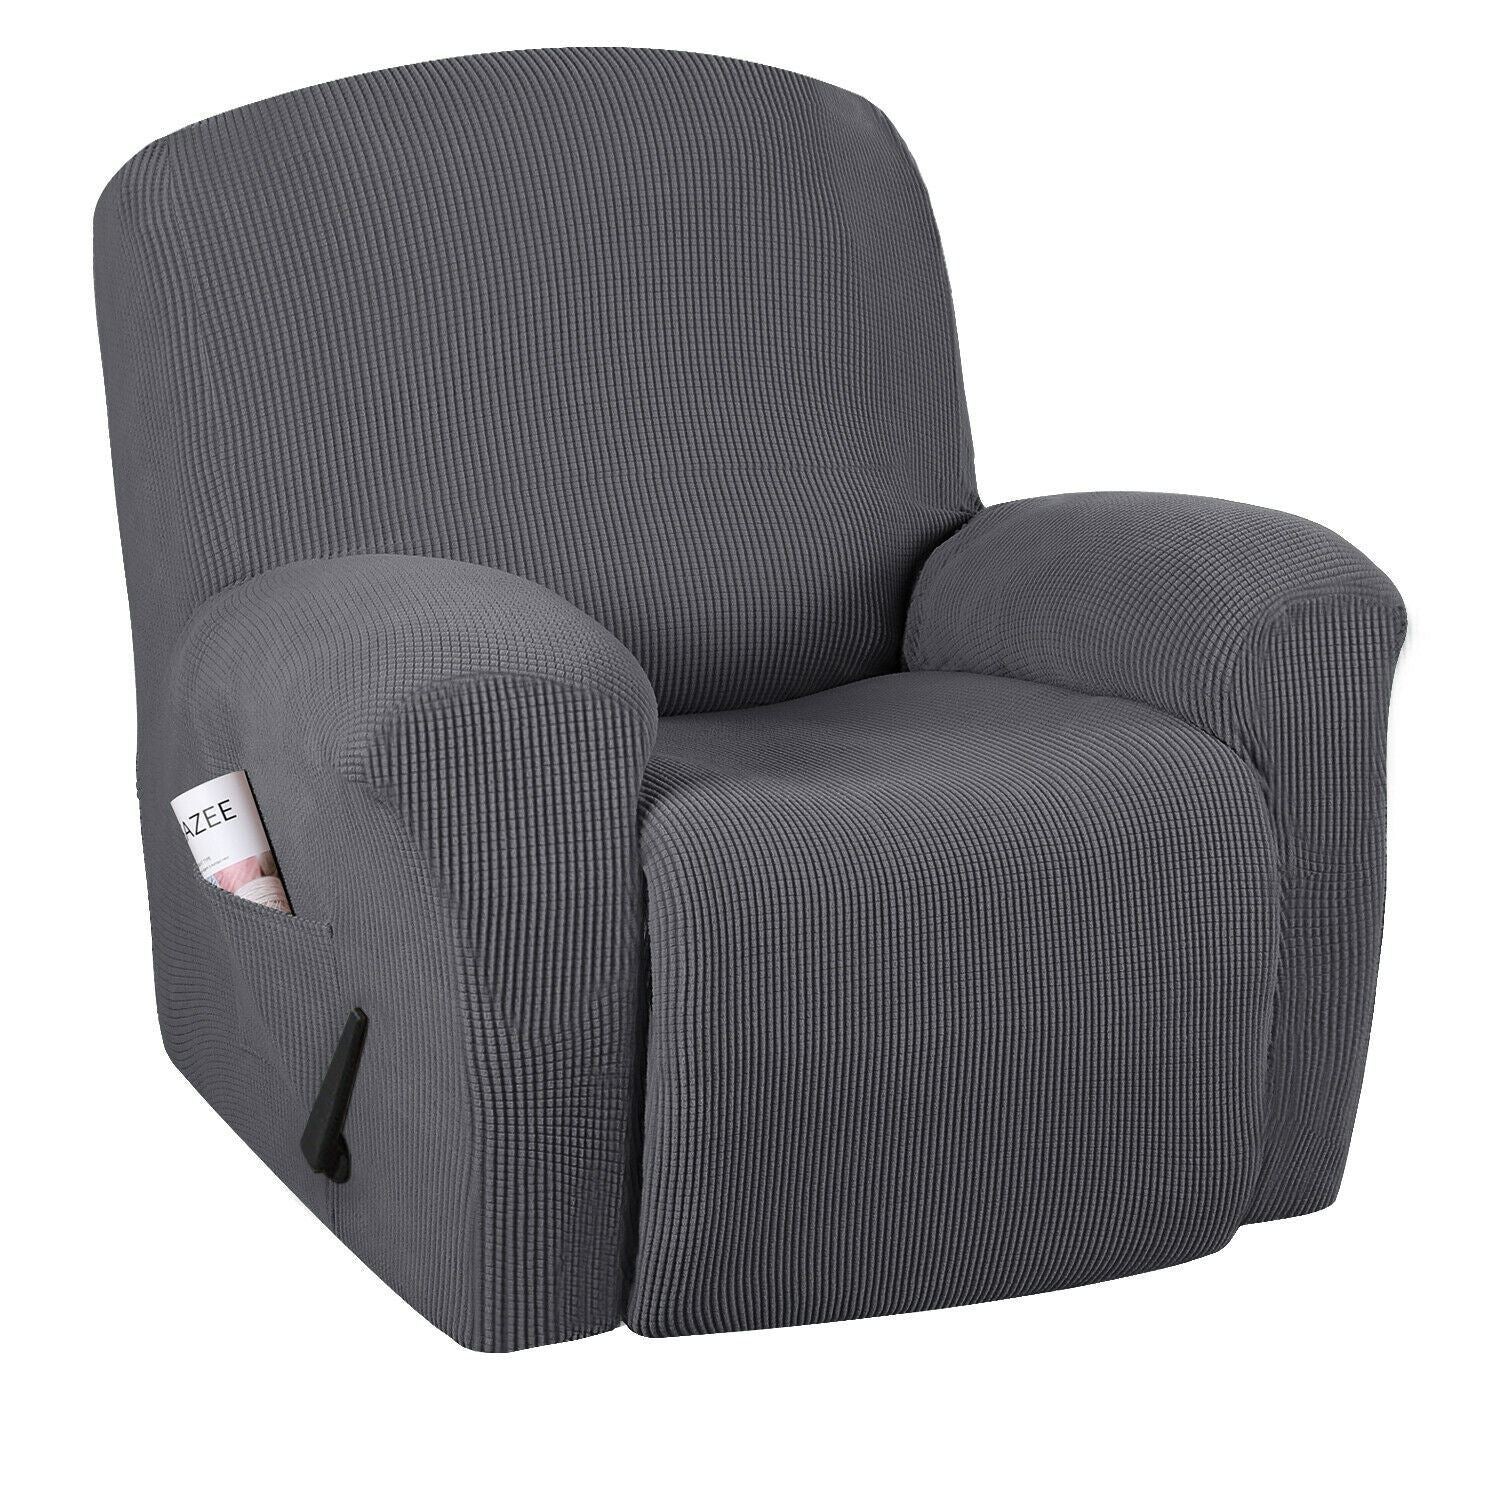 Stretch Recliner Cover 1-Piece Thick Soft Jacquard Recliner Chair Slip Cover